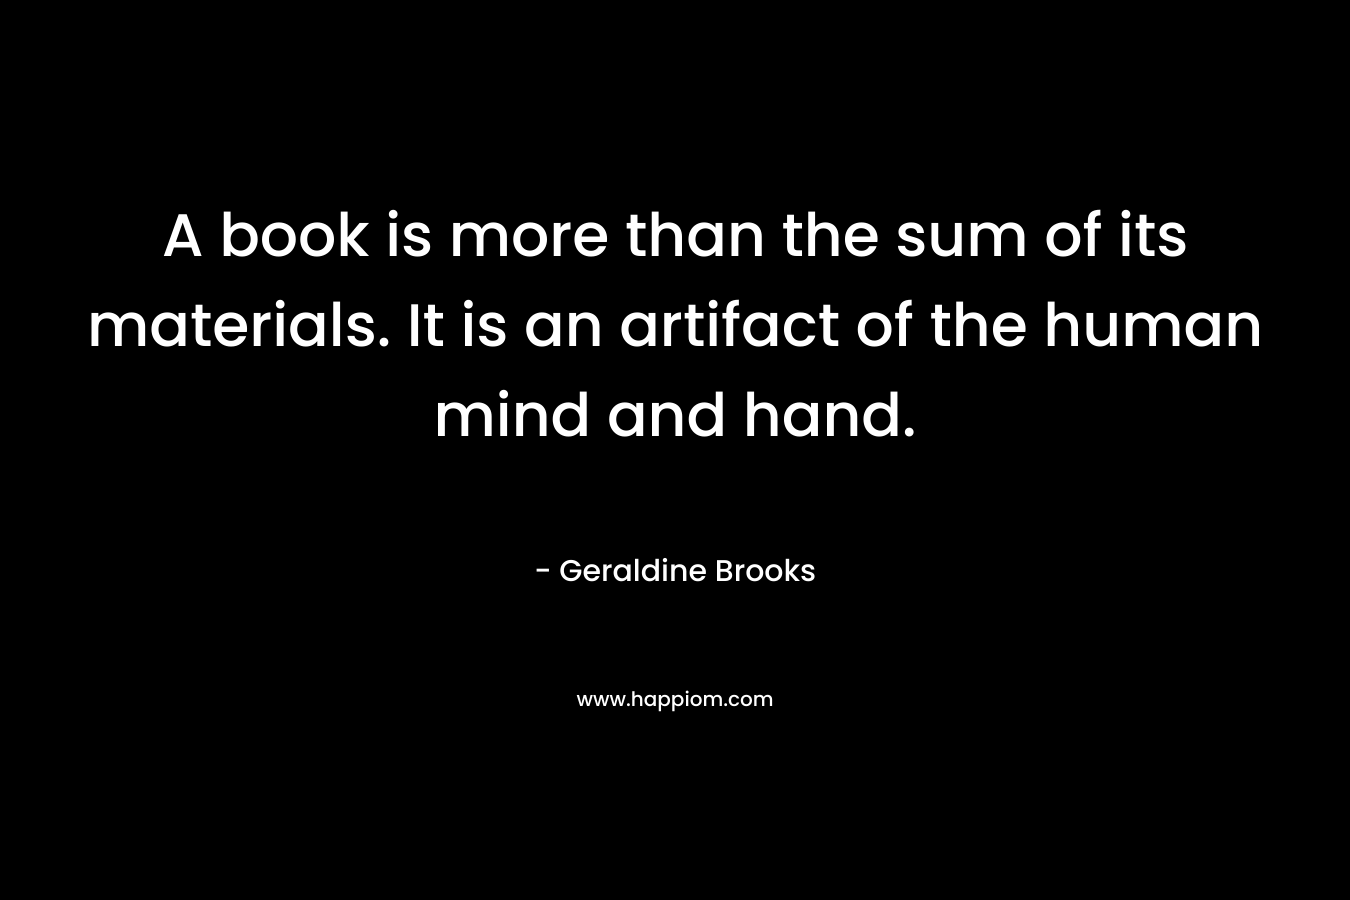 A book is more than the sum of its materials. It is an artifact of the human mind and hand.